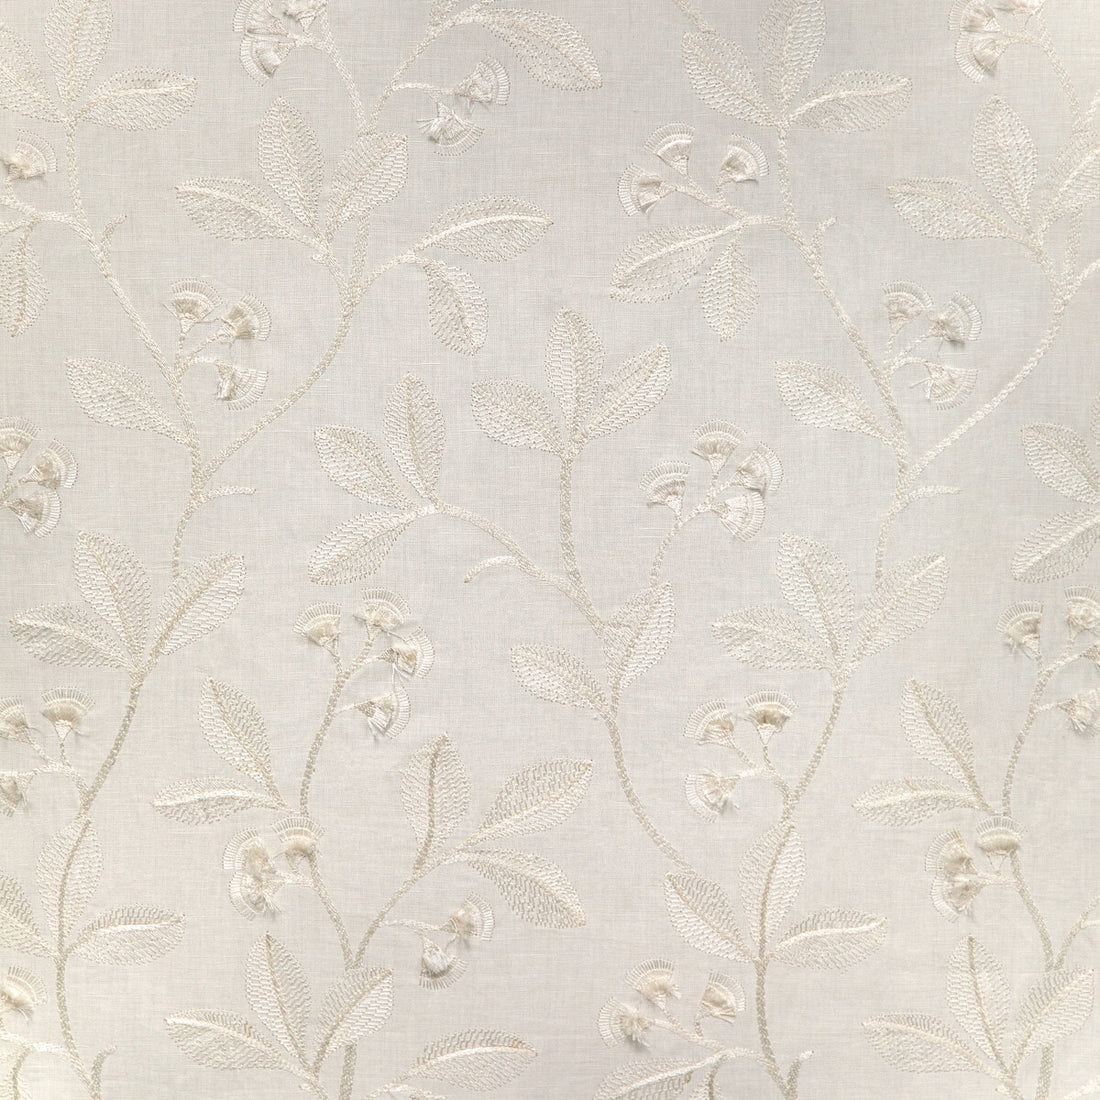 Iris Embroidery fabric in ivory color - pattern 2023144.1.0 - by Lee Jofa in the Garden Walk collection